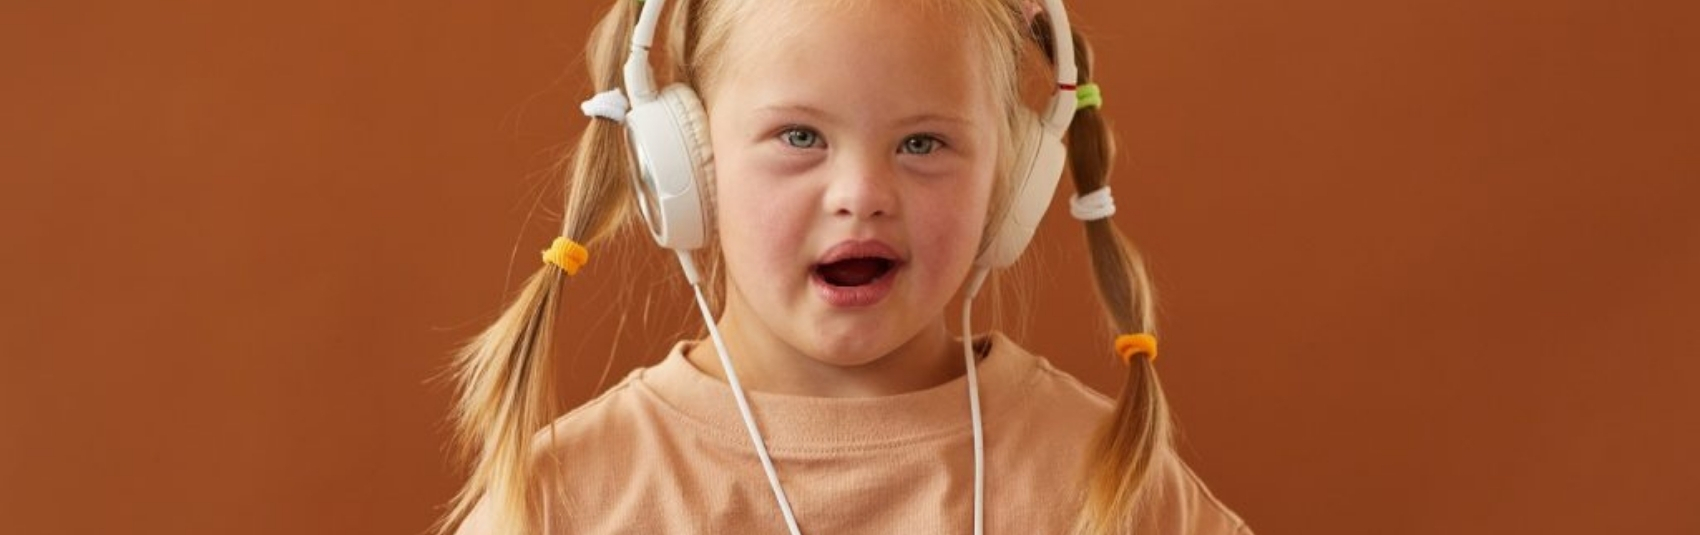 young girl with blonde hair holding iPad and listening to music using over the ear headphones